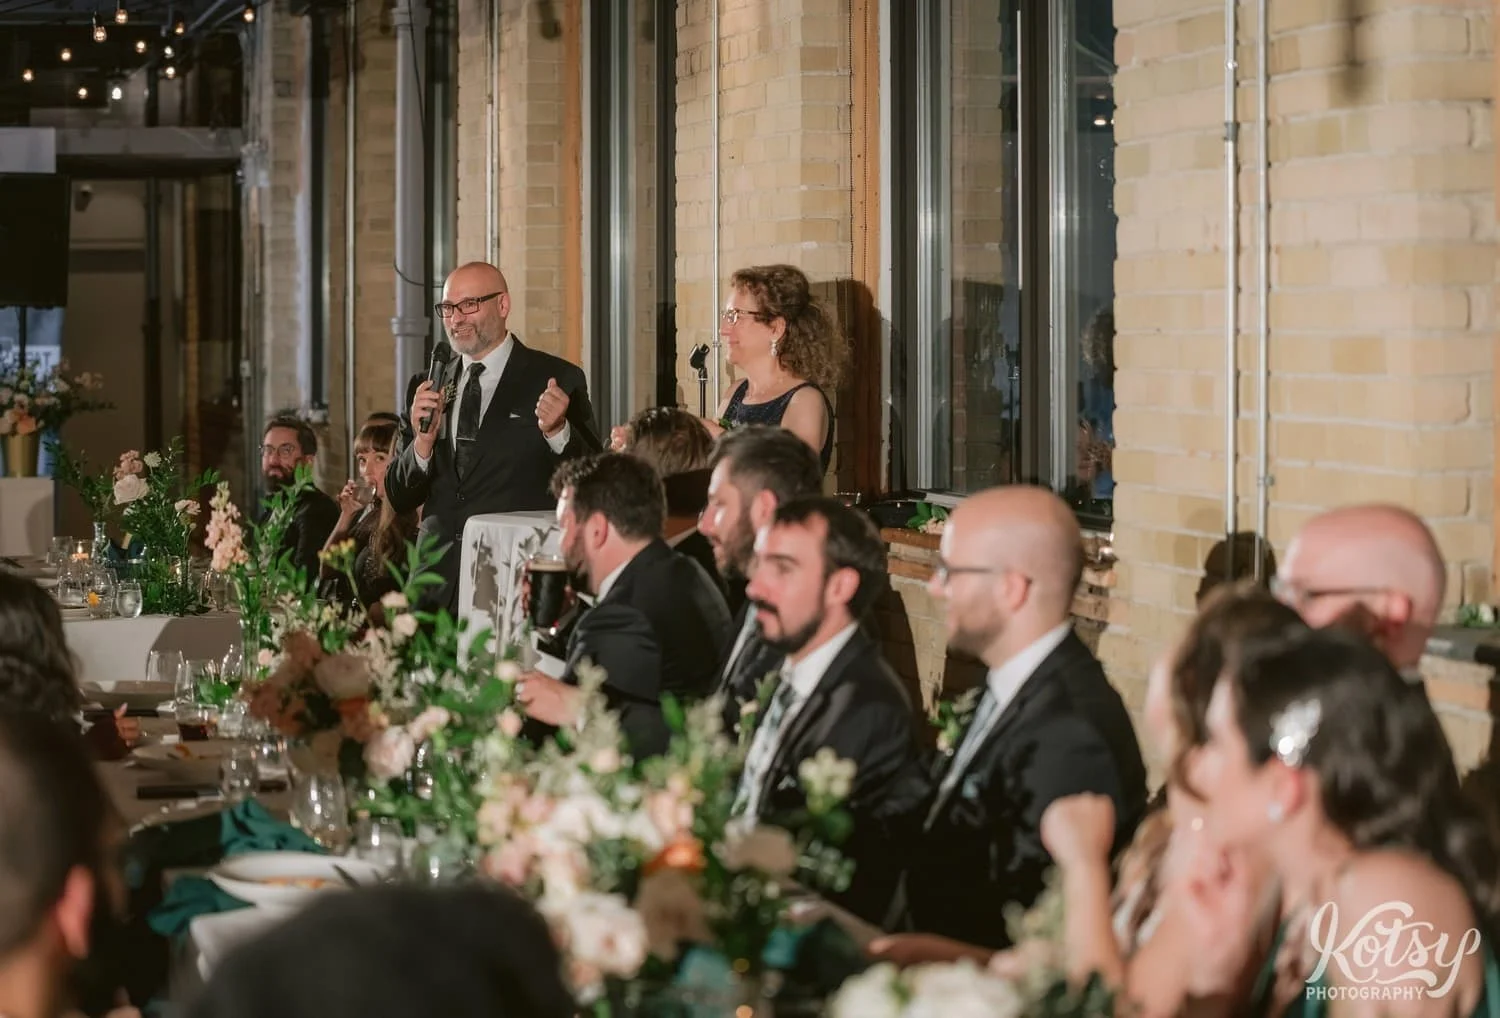 A man in a black suit and black tie speaking into a microphone is seen beyond a row of people sitting at a long table during a Second Floor Events wedding reception in Toronto, Canada.